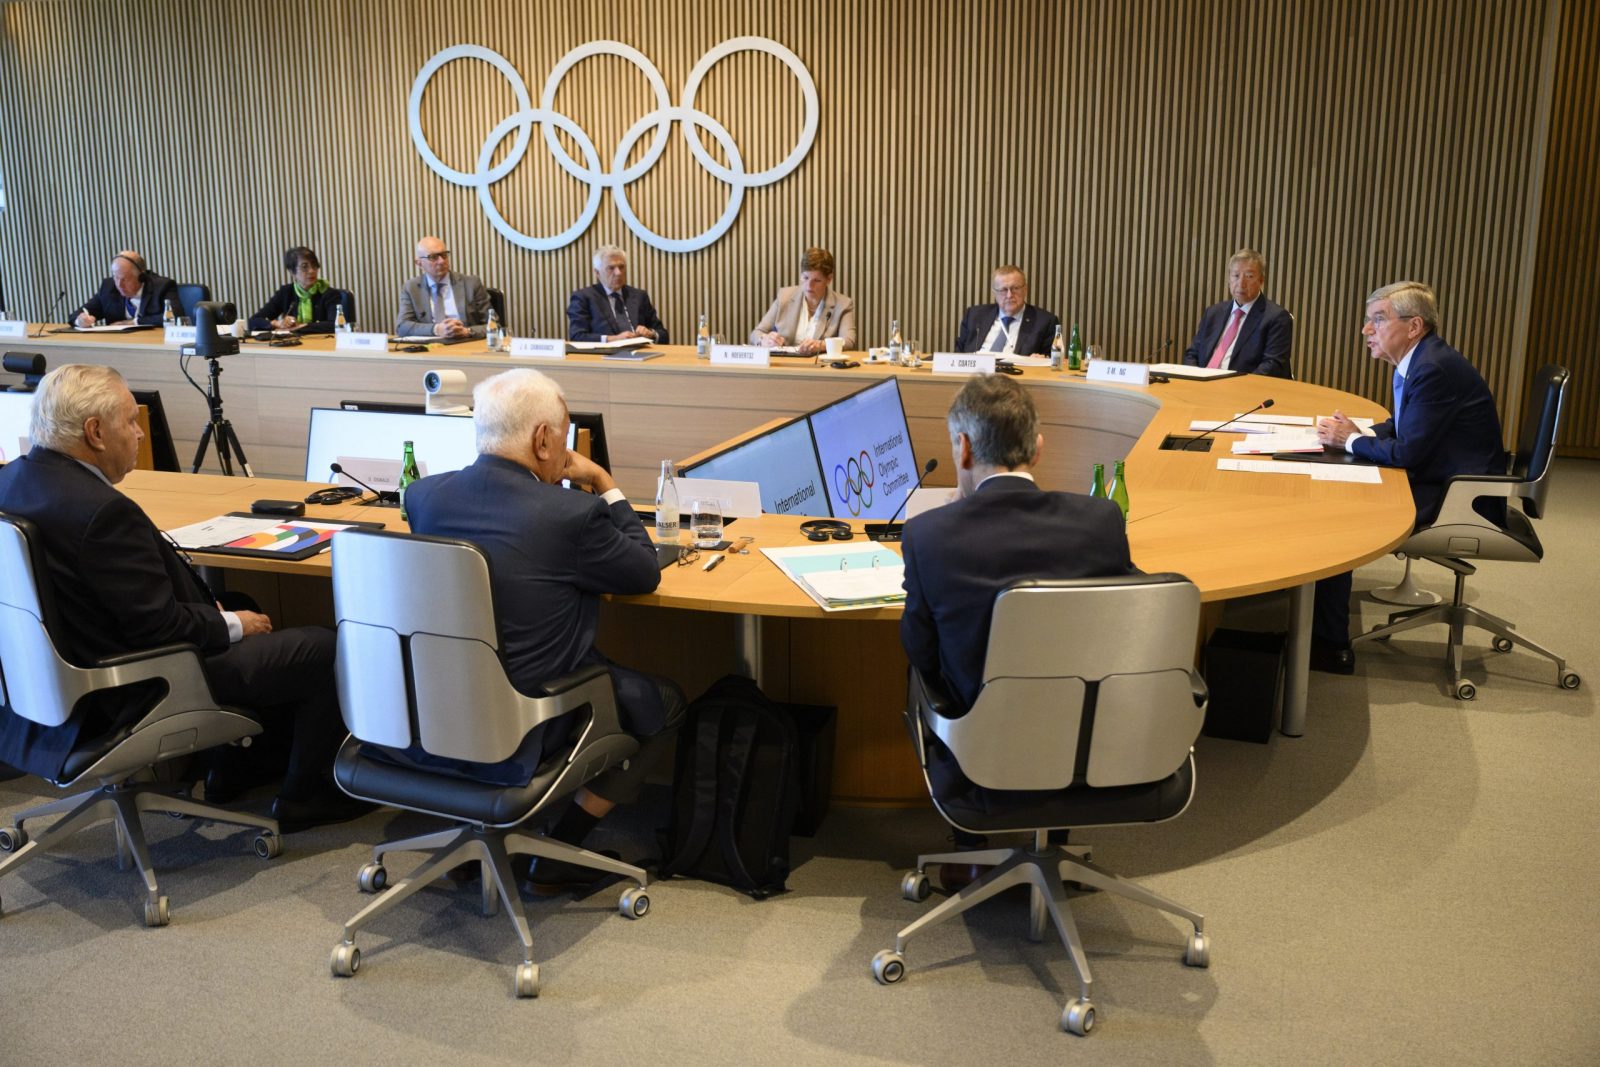 epa10546653 International Olympic Committee (IOC) President Thomas Bach (R) speaks at the opening of the executive board meeting of the International Olympic Committee (IOC), at the Olympic House, in Lausanne, Switzerland, 28 March 2023. The International Olympic Committee (IOC) Executive Board is set to discuss the results of consultations regarding the status of athletes from Russia and Belarus in its meeting set to run until March 30.  EPA/LAURENT GILLIERON